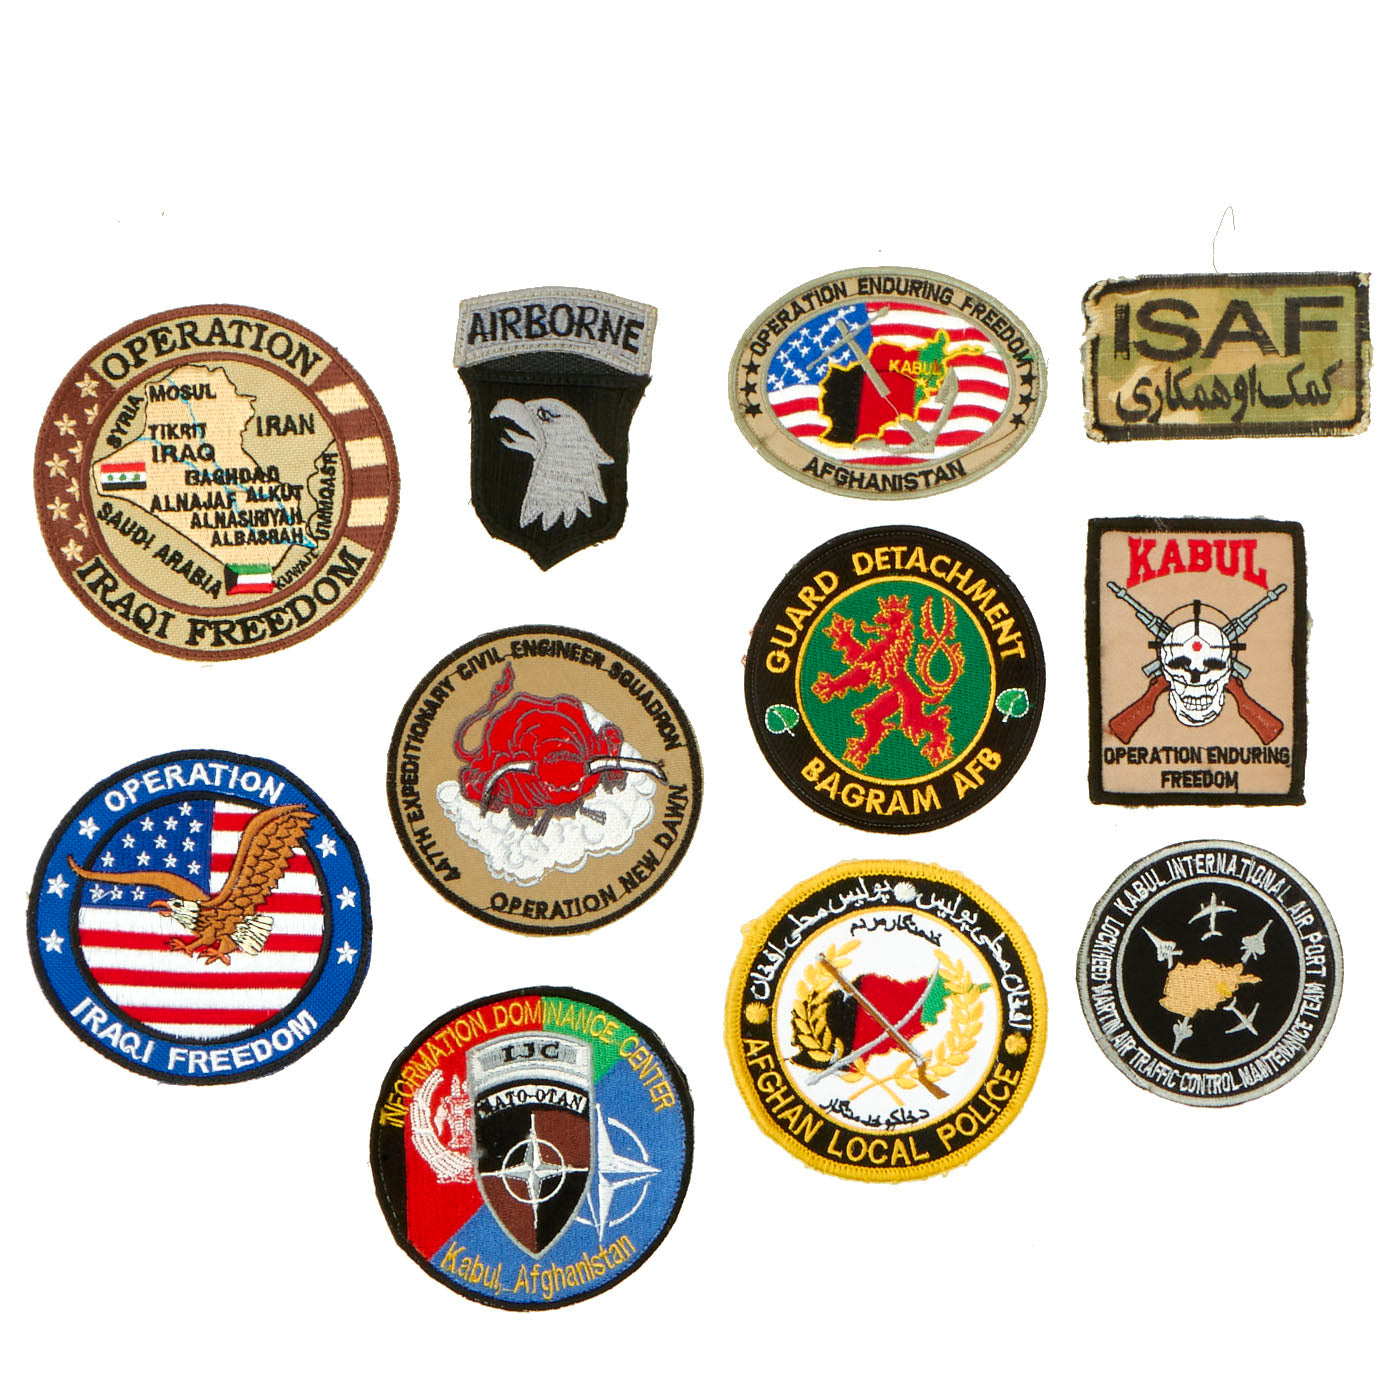 The History of Military Patches - Custom Military Patches - Patches 4 Less